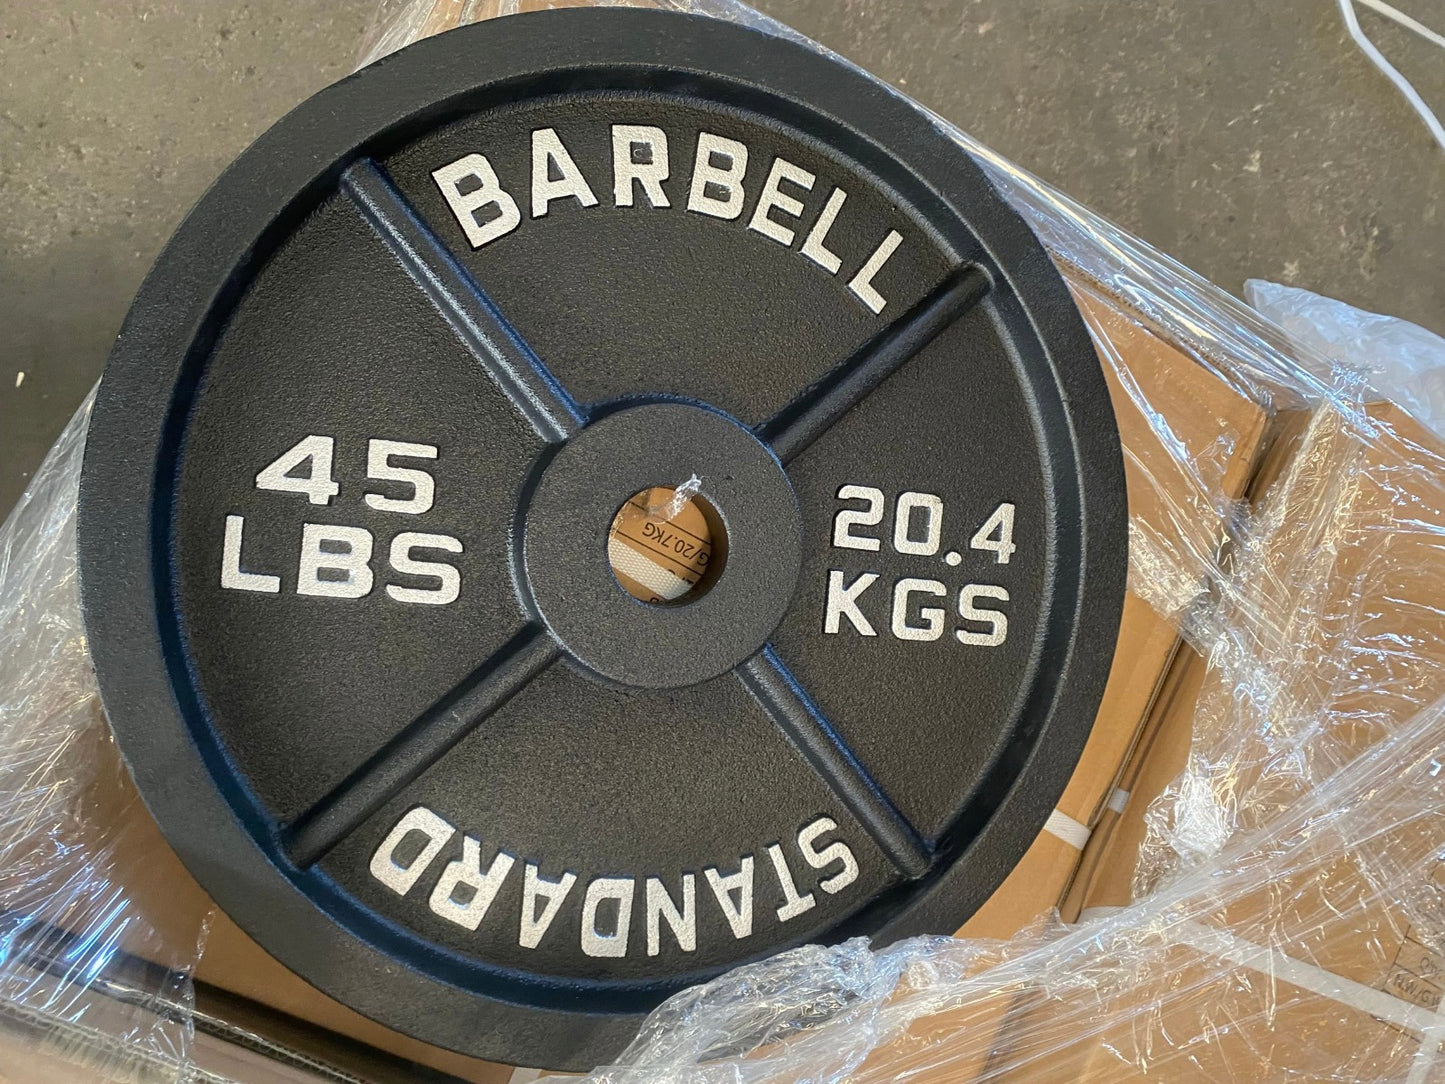 Olympic Cast Iron Weight Plates in Pairs – Harbor Heavyweights Co.